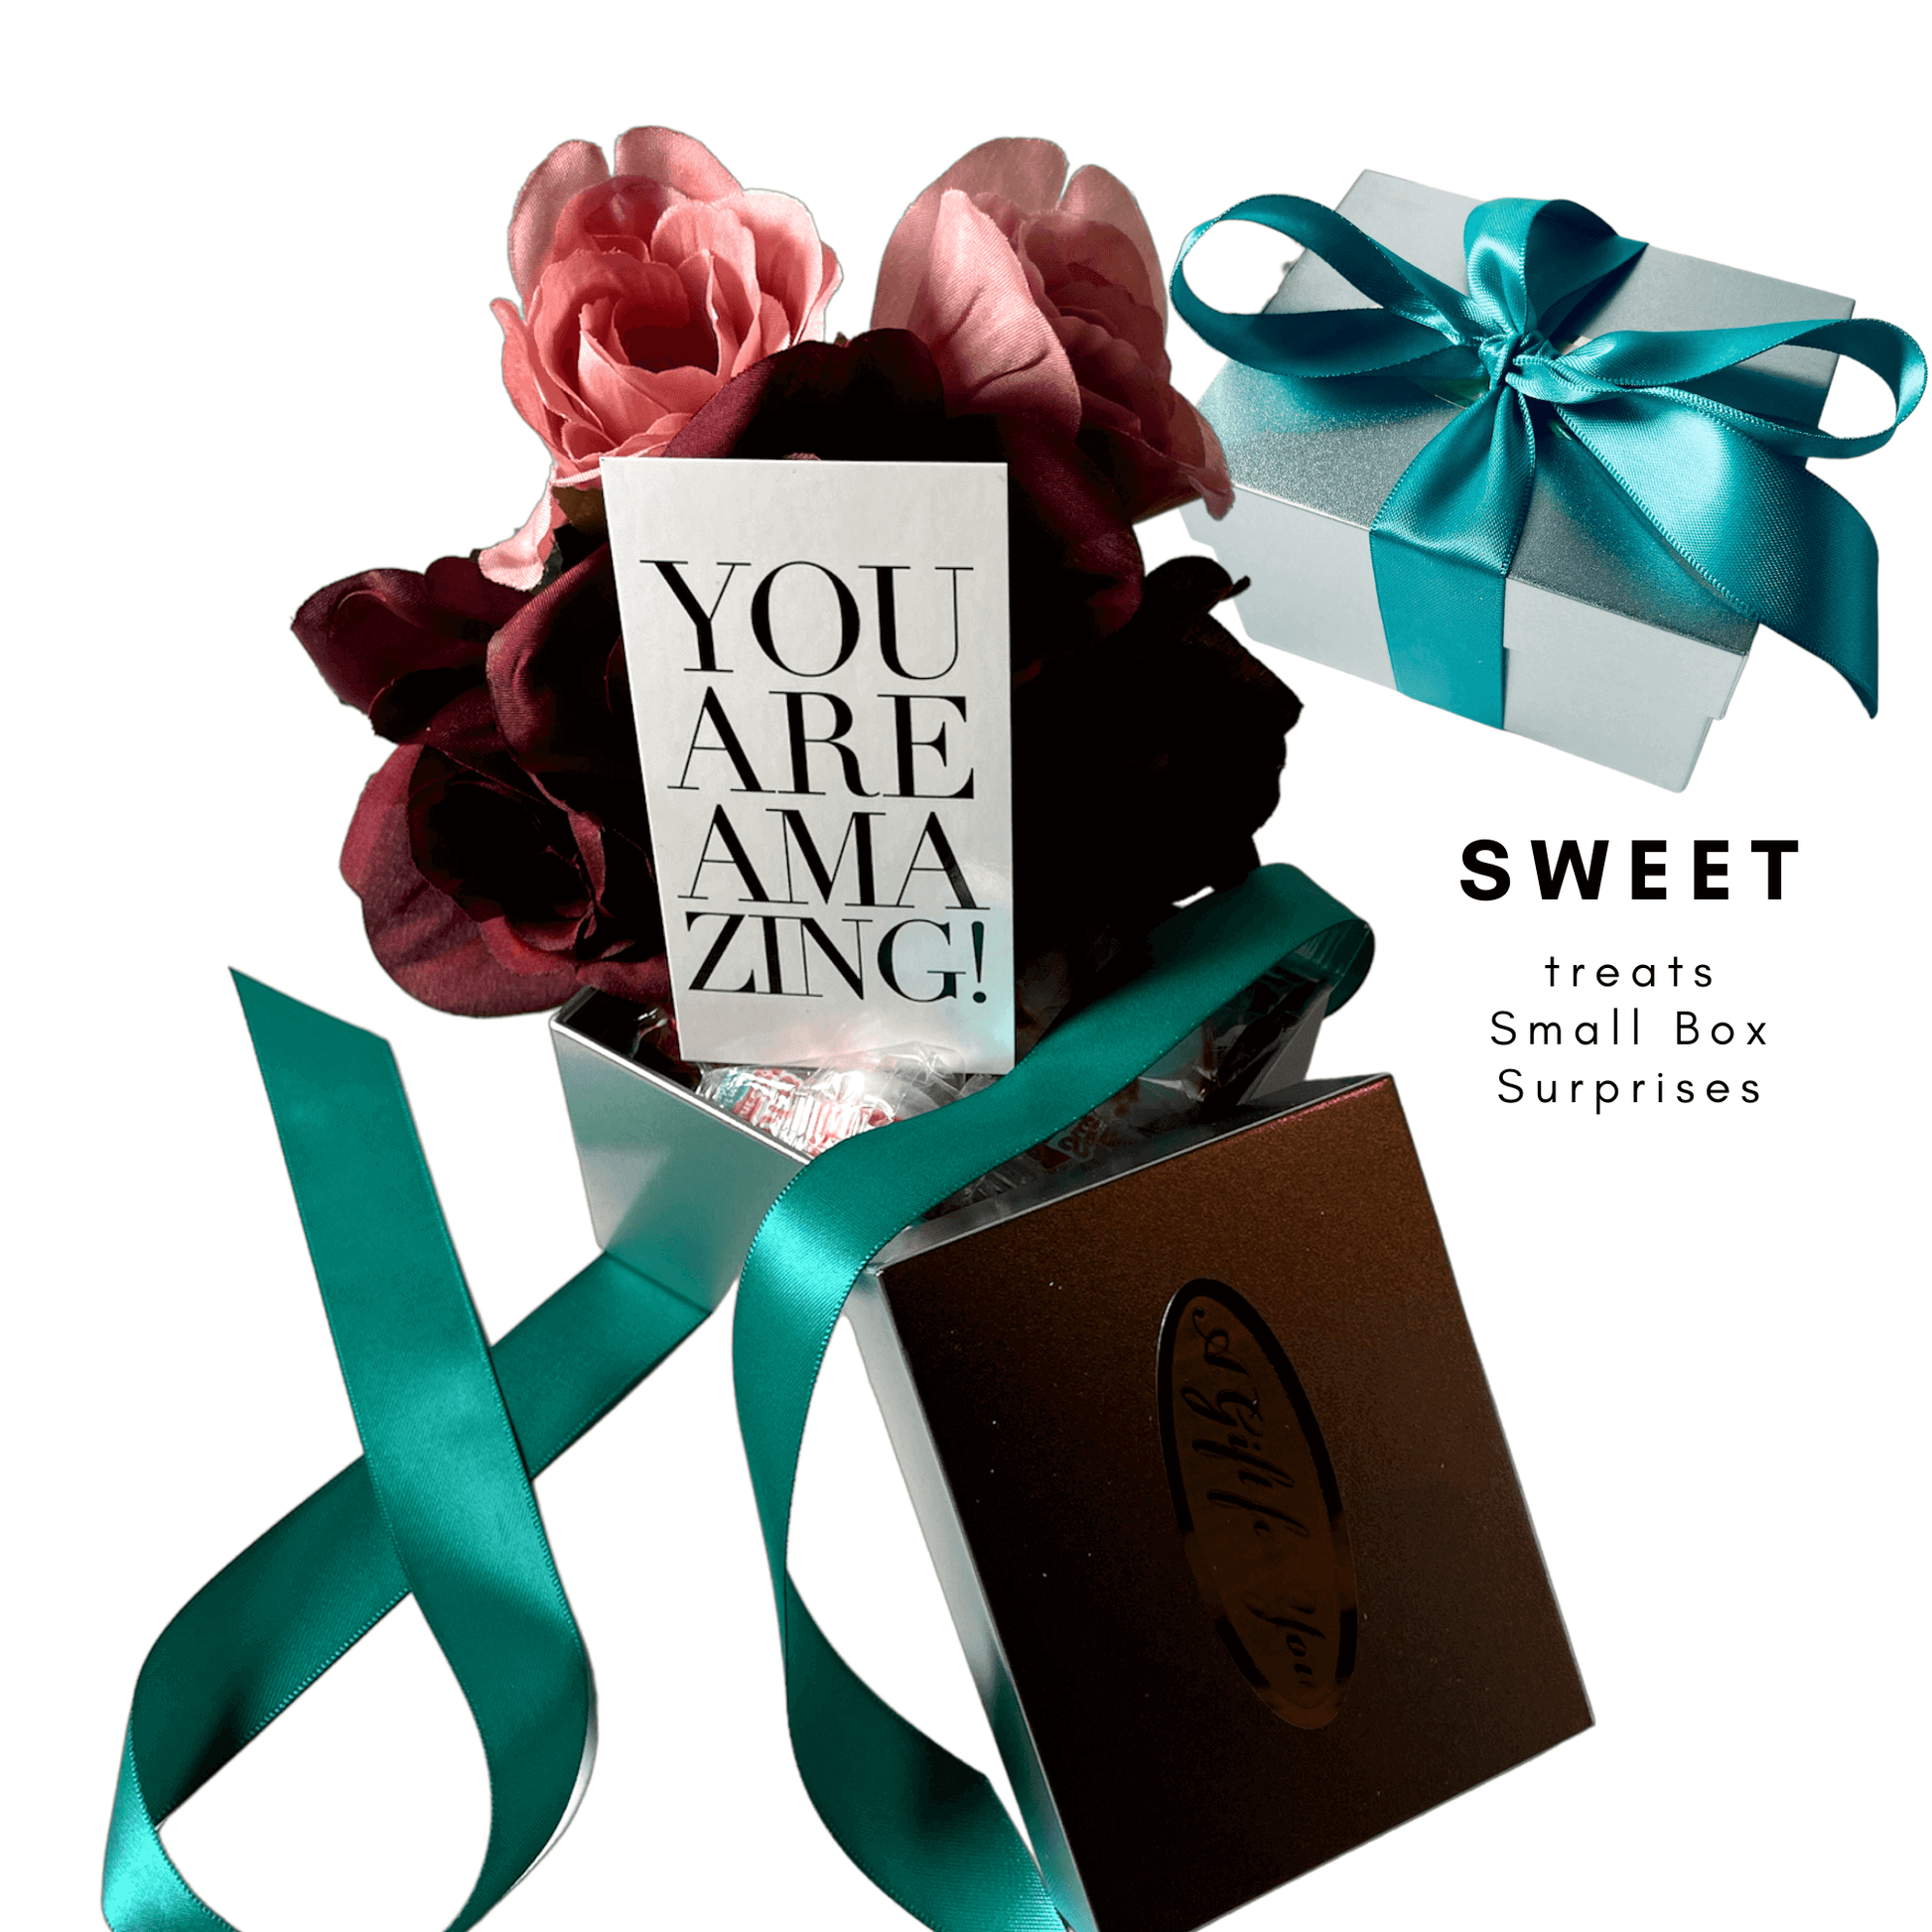 Charming candy box set with delicate flowers, ribbon, and a decorative "You are amazing!" label, offering sweet treats and small surprises.